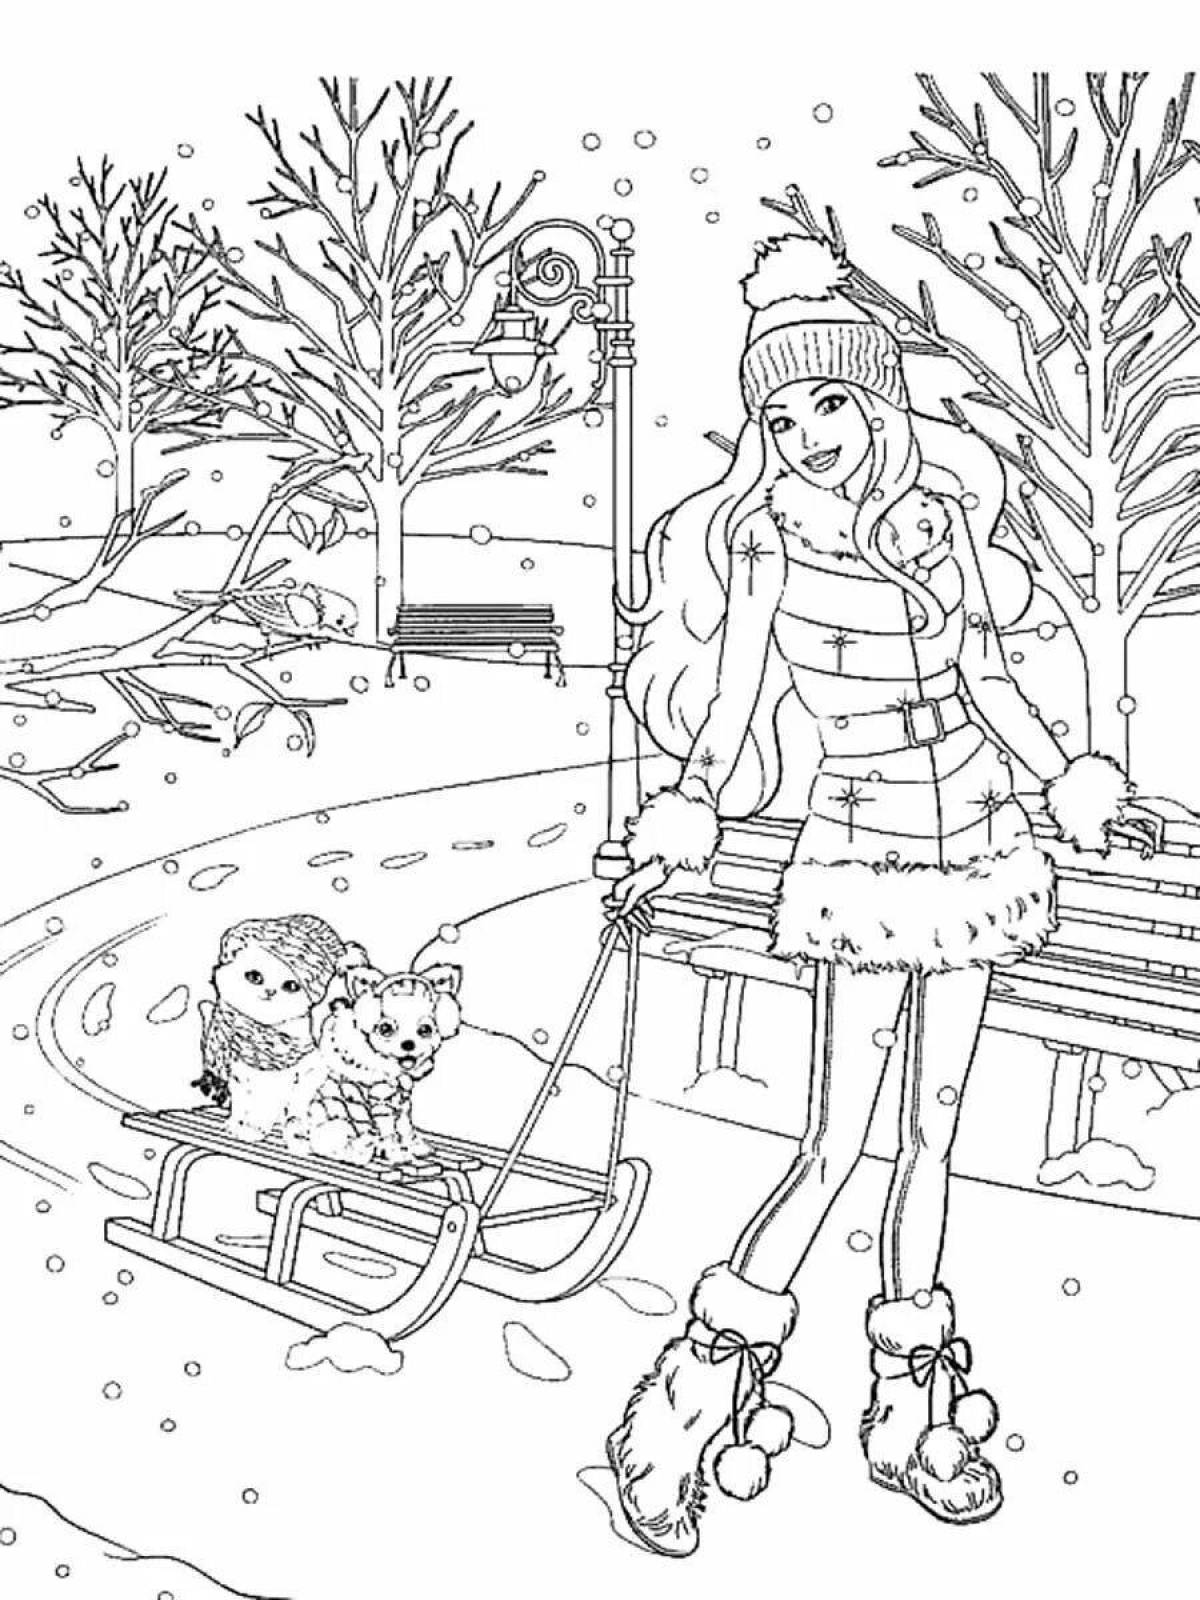 Blessed Christmas coloring book for 10 year old girls